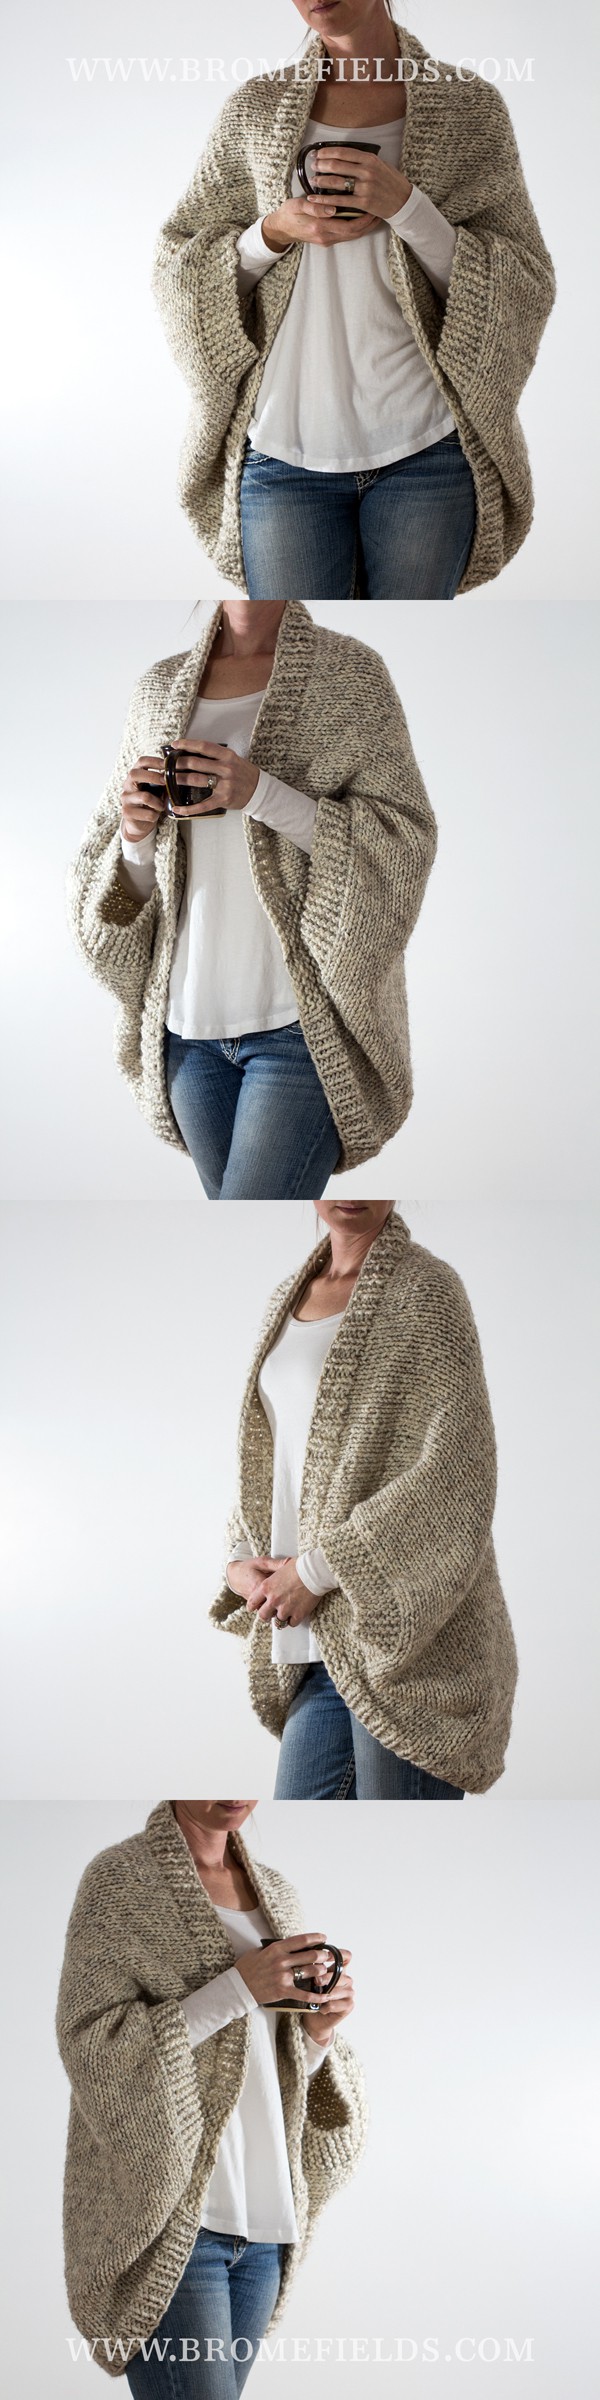 Sweater : Decisiveness Super Bulky pattern by Brome Fields